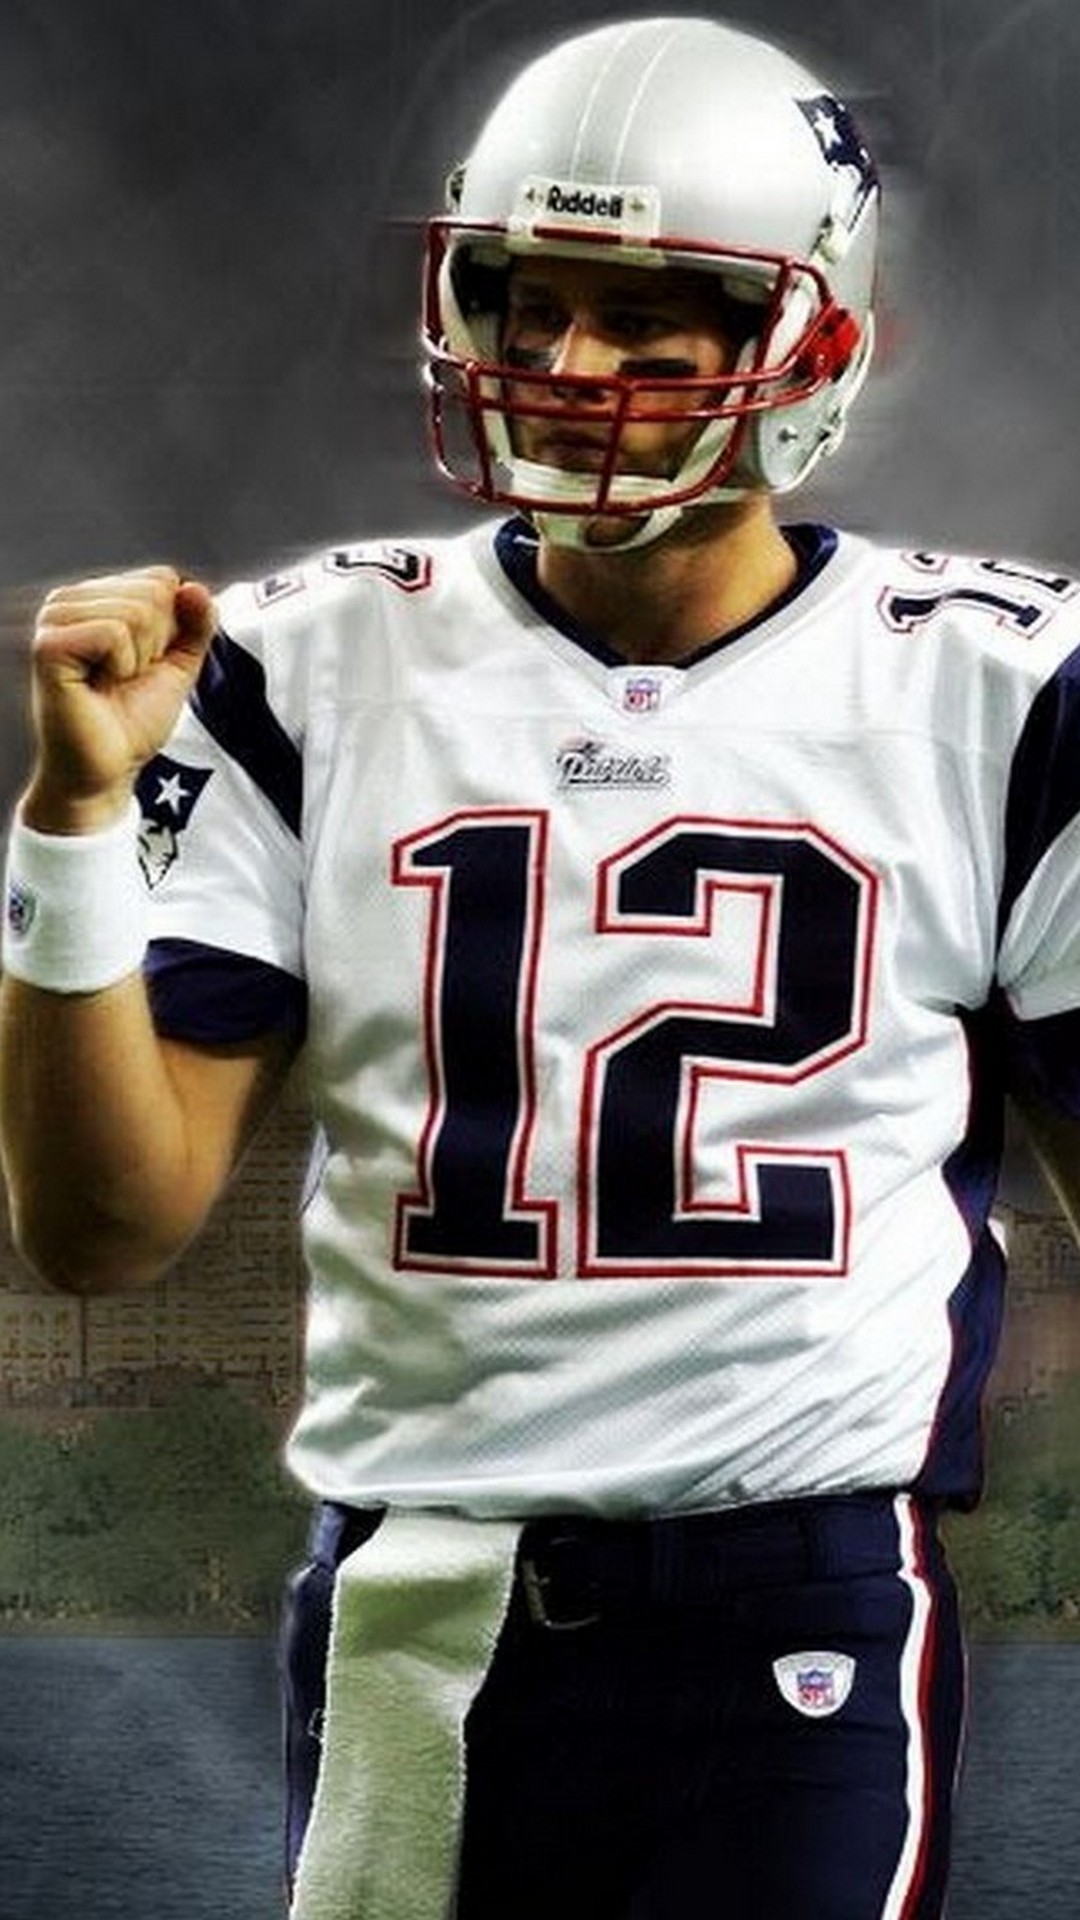 Tom Brady Phone Wallpaper with high-resolution 1080x1920 pixel. Download all Mobile Wallpapers and Use them as wallpapers for your iPhone, Tablet, iPad, Android and other mobile devices